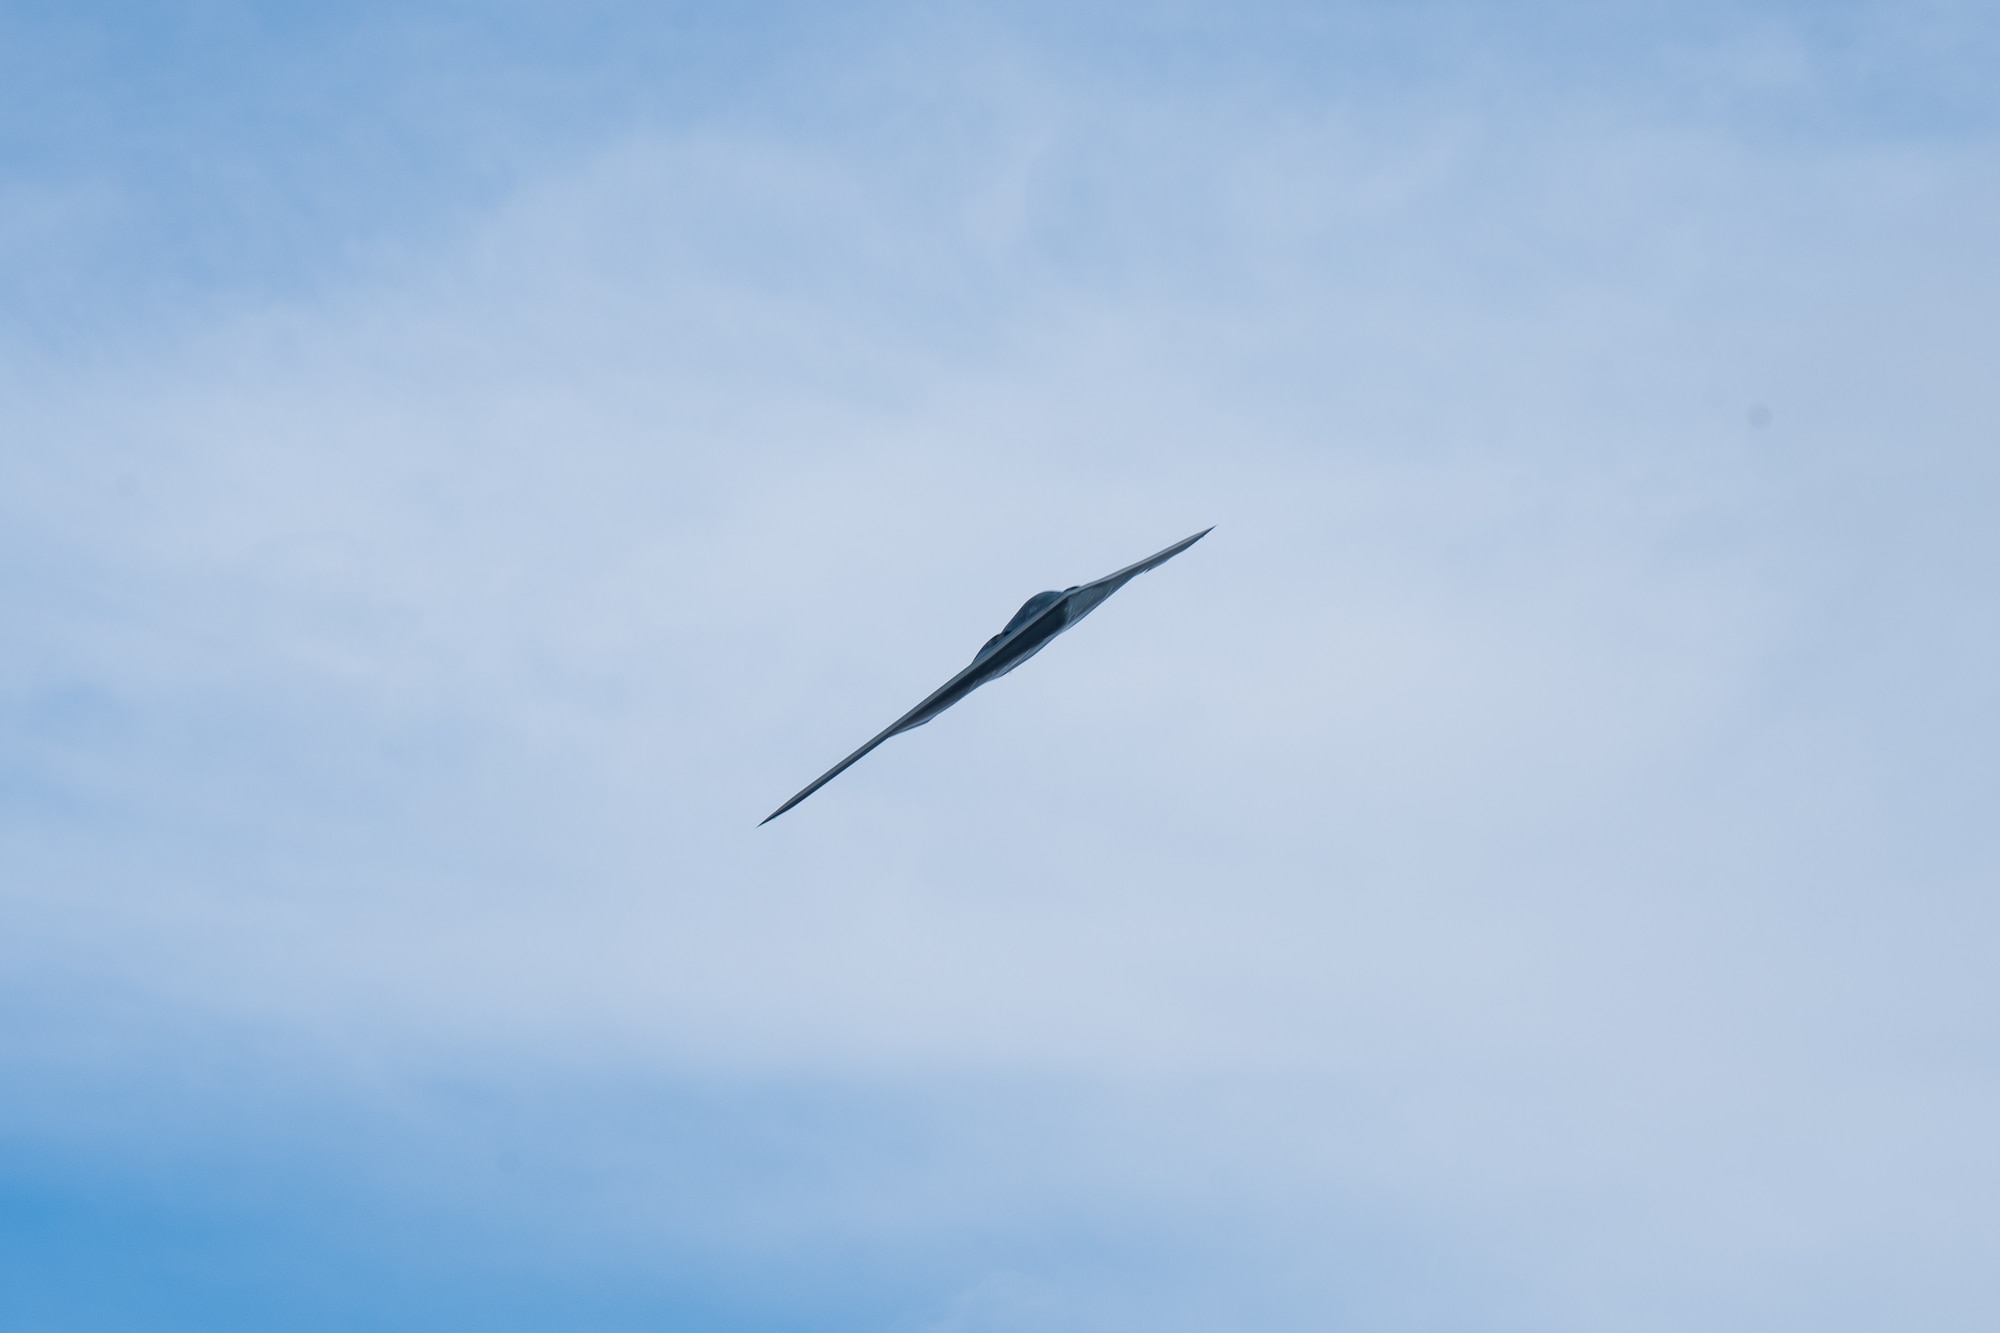 A U.S. Air Force B-2 Spirit stealth bomber assigned to the 509th Bomb Wing, performs a flyover to celebrate the 30th anniversary of its arrival at Whiteman Air Force Base, Mo., Dec. 15, 2023. The revolutionary blending of low-observable technologies with high aerodynamic efficiency and large payload gives the B-2 important advantages over existing bombers. (U.S. Air Force photo by Airman 1st Class Robert E. Hicks)